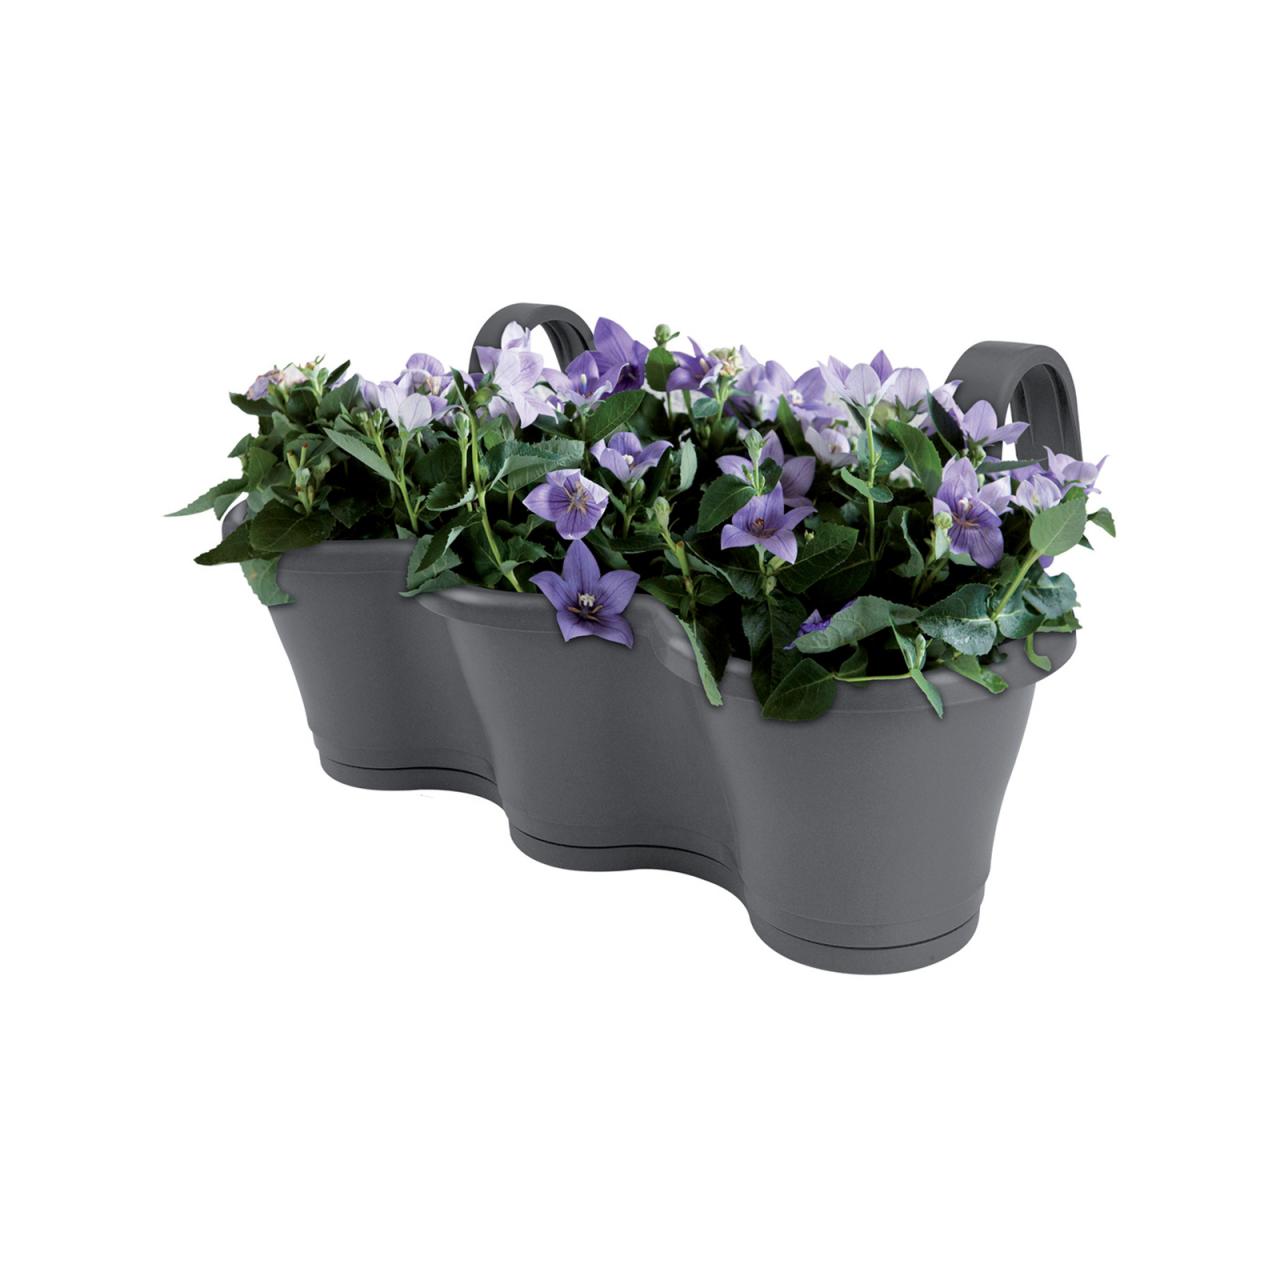 Hanging Plants Indoor | Balcony Hanging Pots: Enhance Your Outdoor Space with Bunnings' Collection